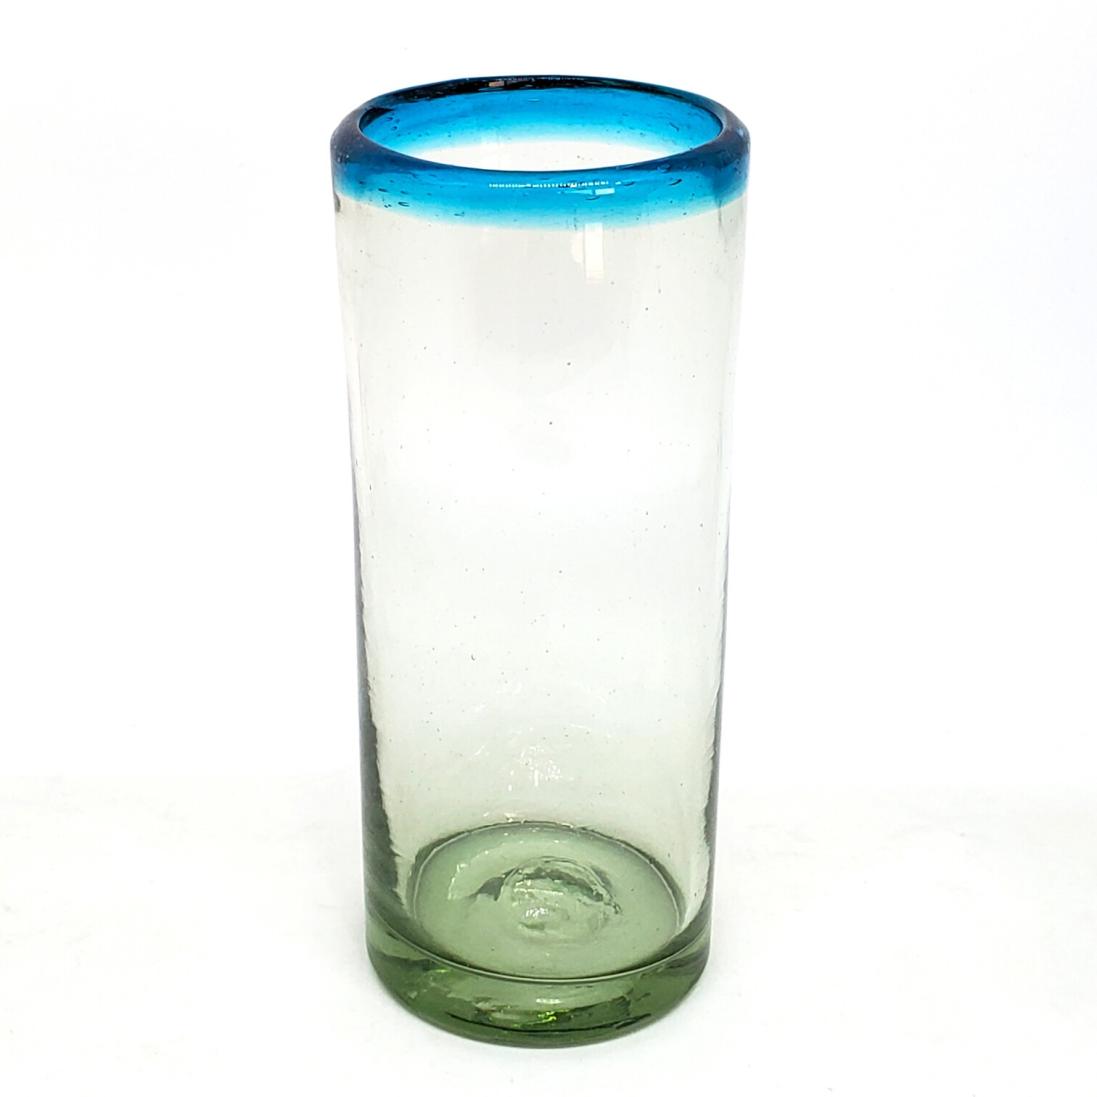 Wholesale Colored Rim Glassware / Aqua Blue Rim 15 oz Highball Glasses  / Enjoy mojitos, cubas or any other refreshing drink with these classy highball glasses.